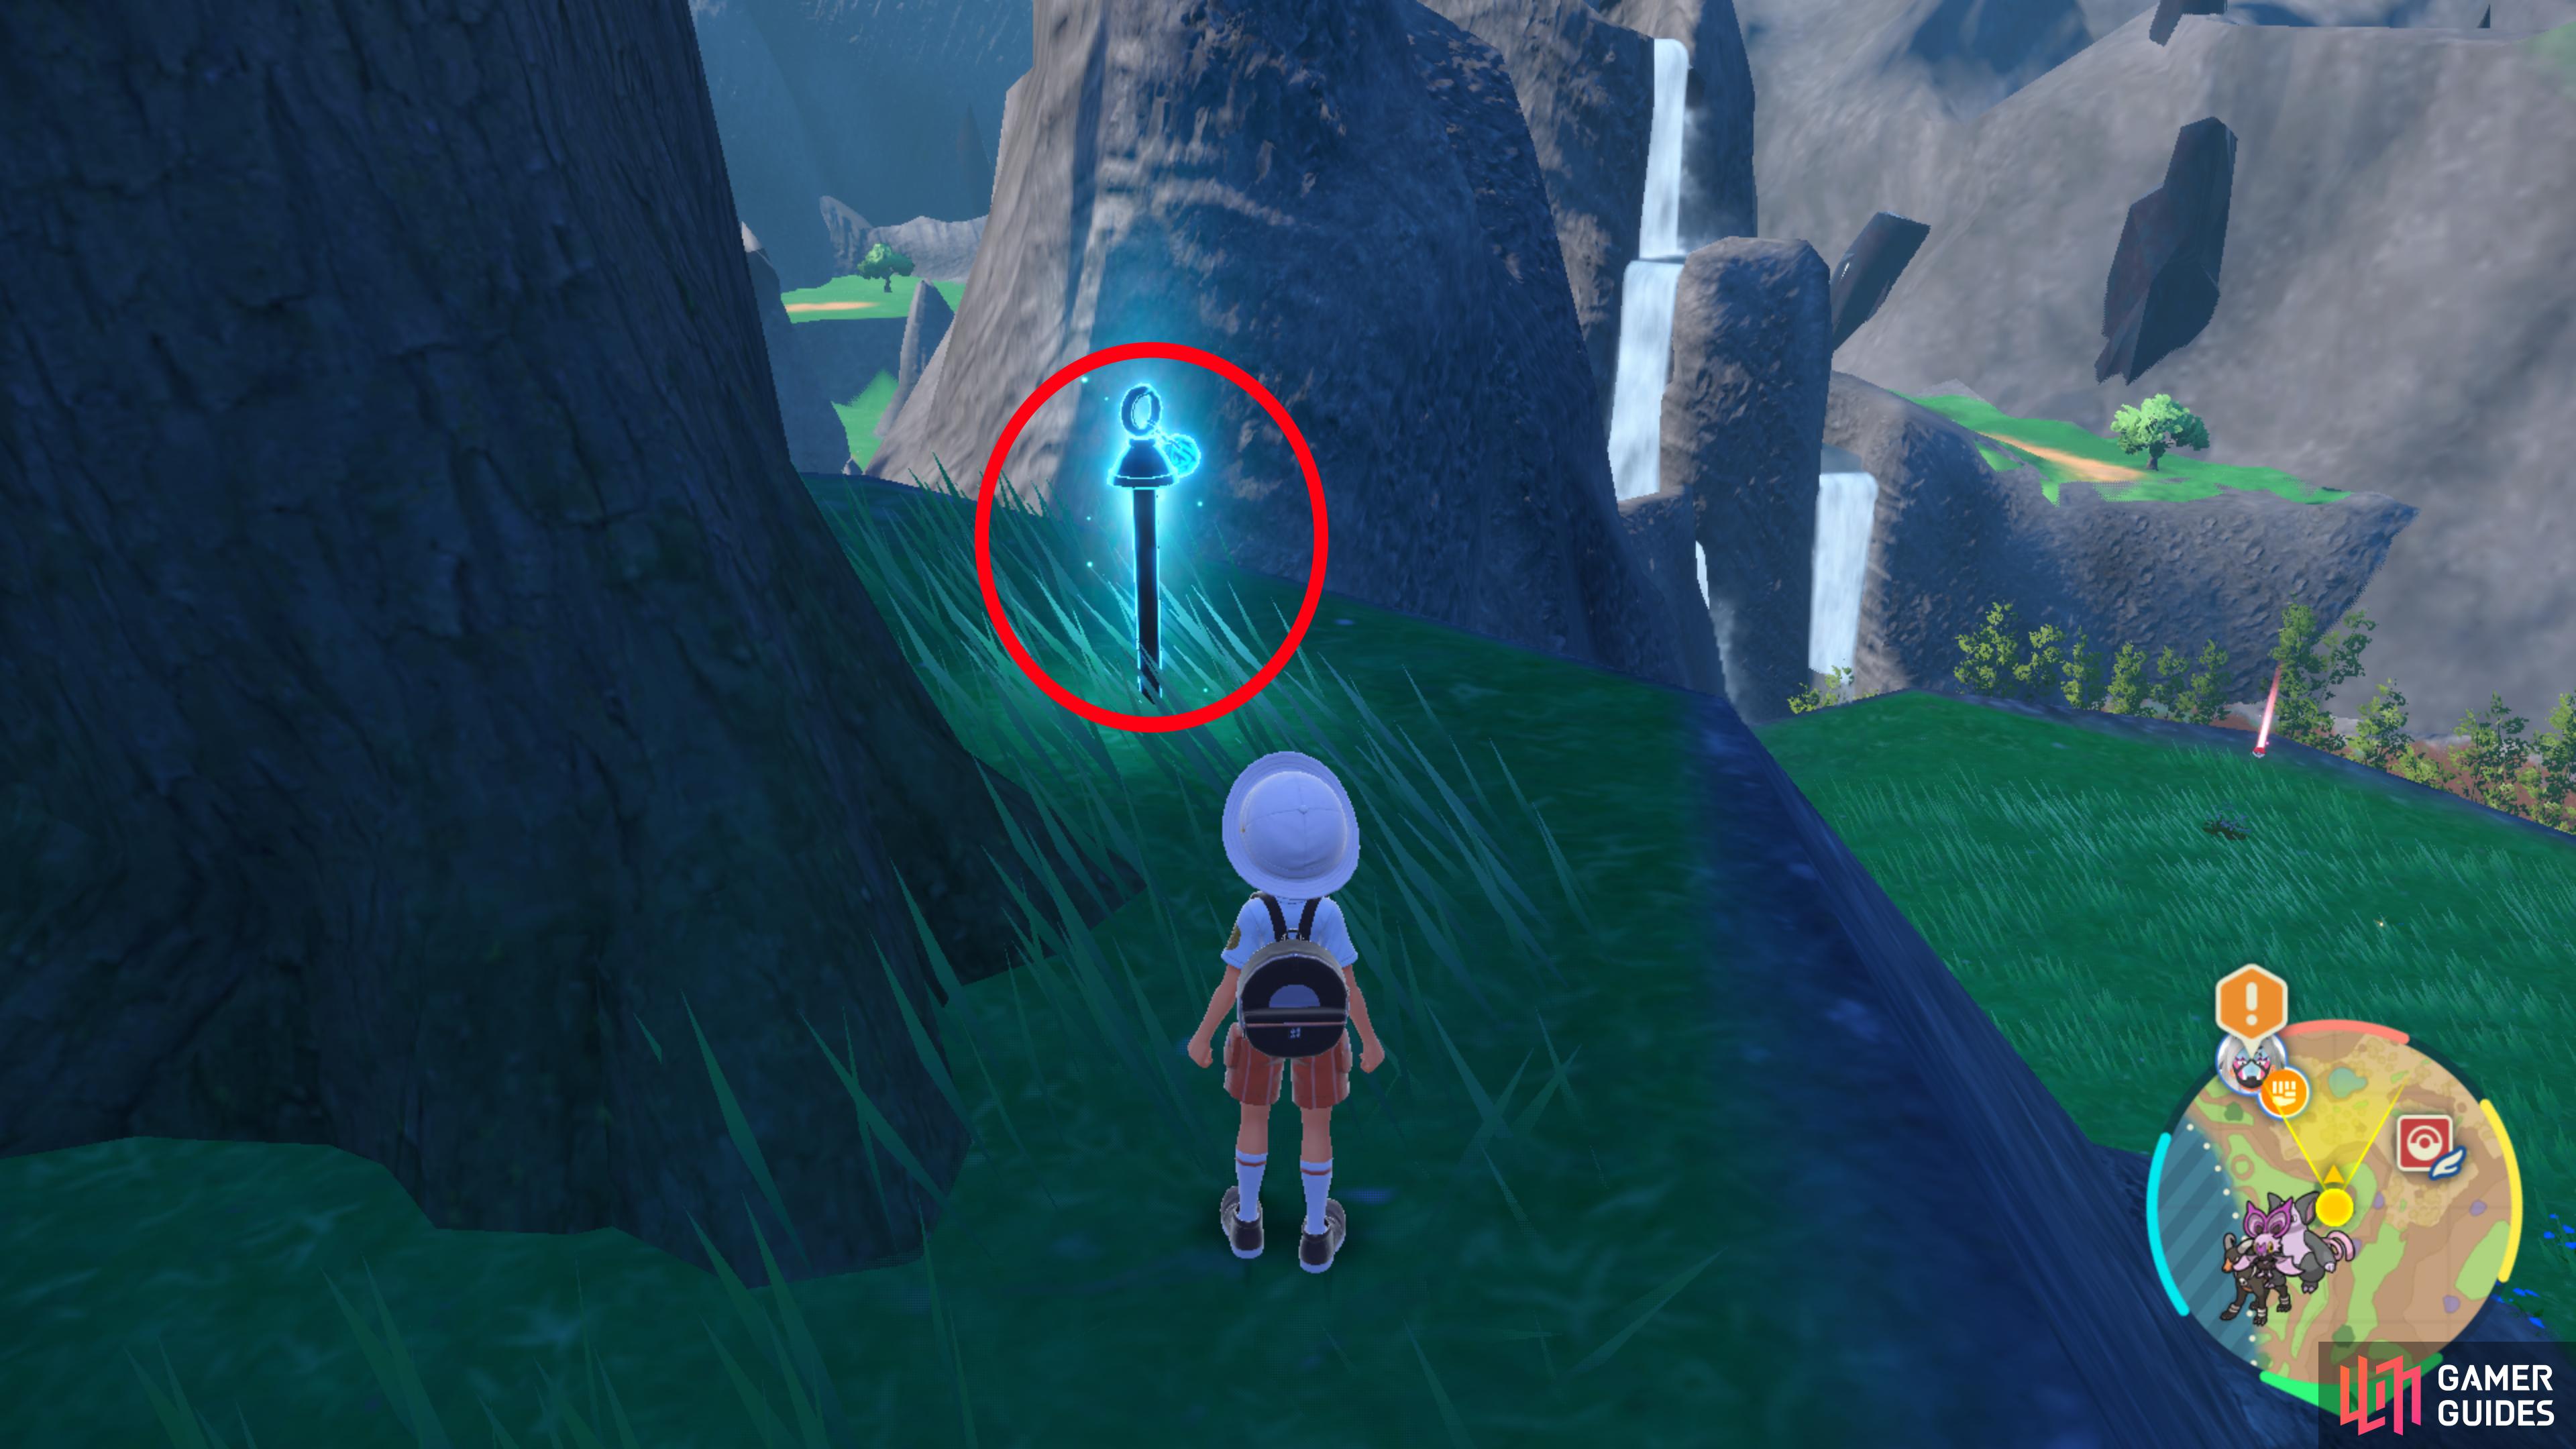 the blue stake can be found next to the tree when facing the waterfall.